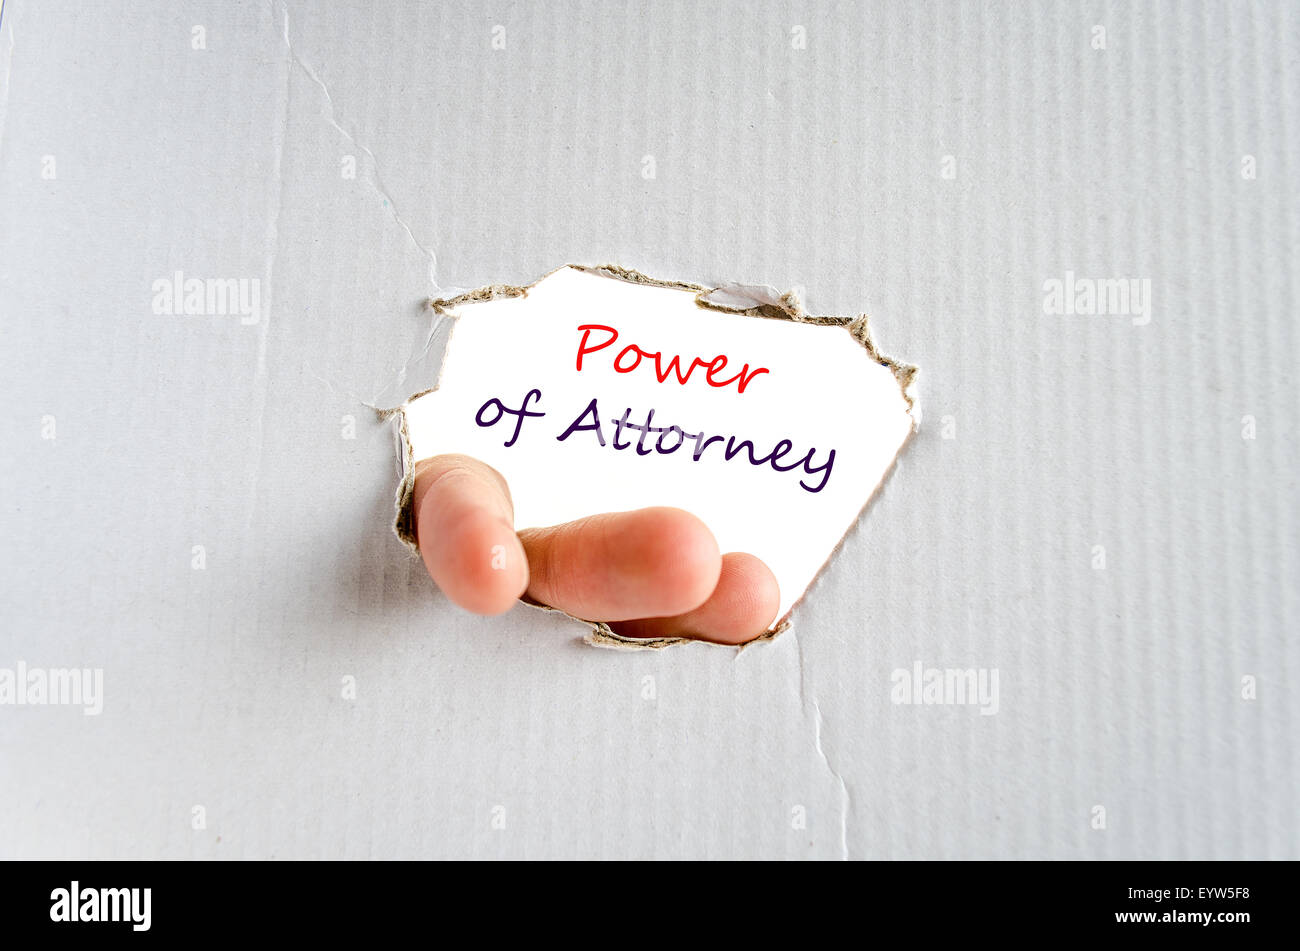 Power of attorney text concept isolated over white background Stock Photo